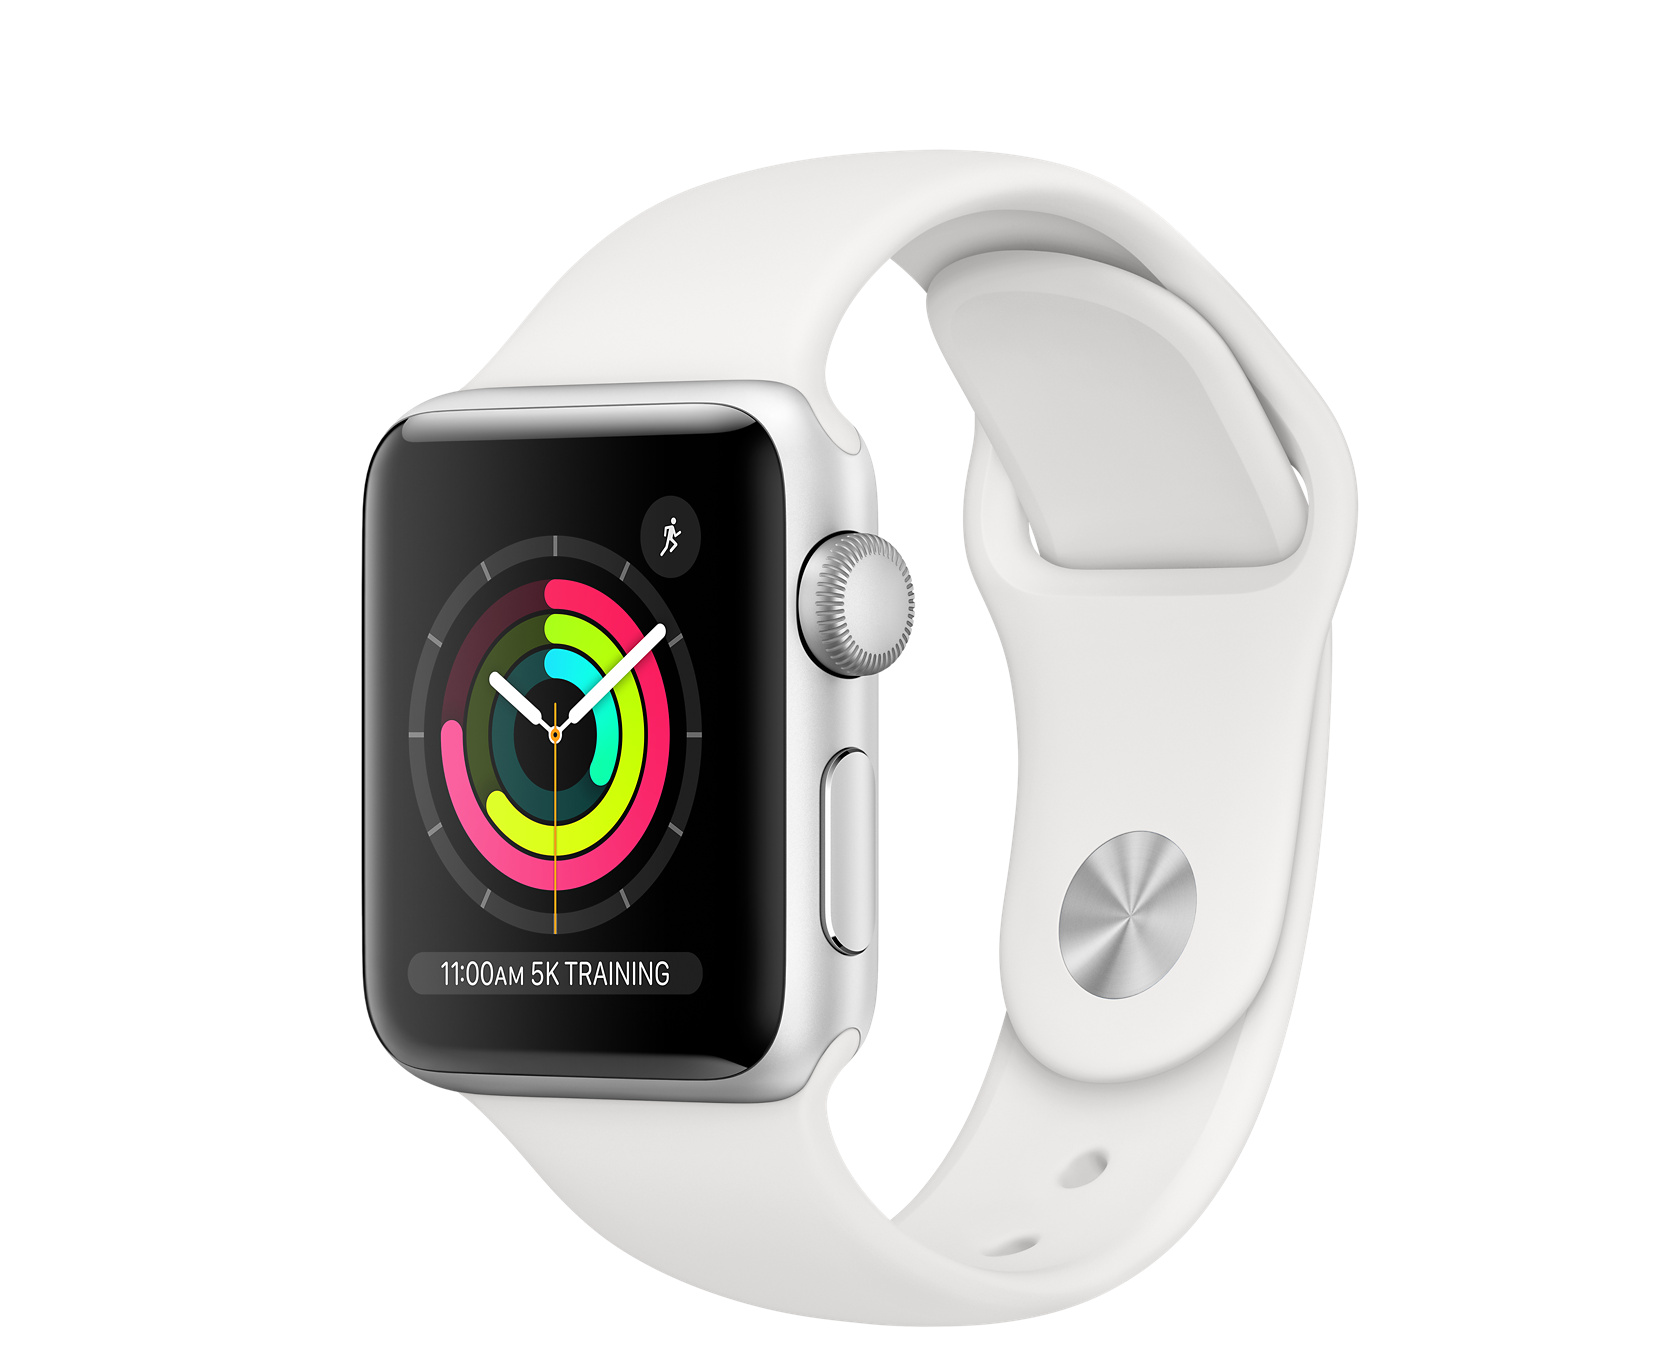 Apple Watch with white band.